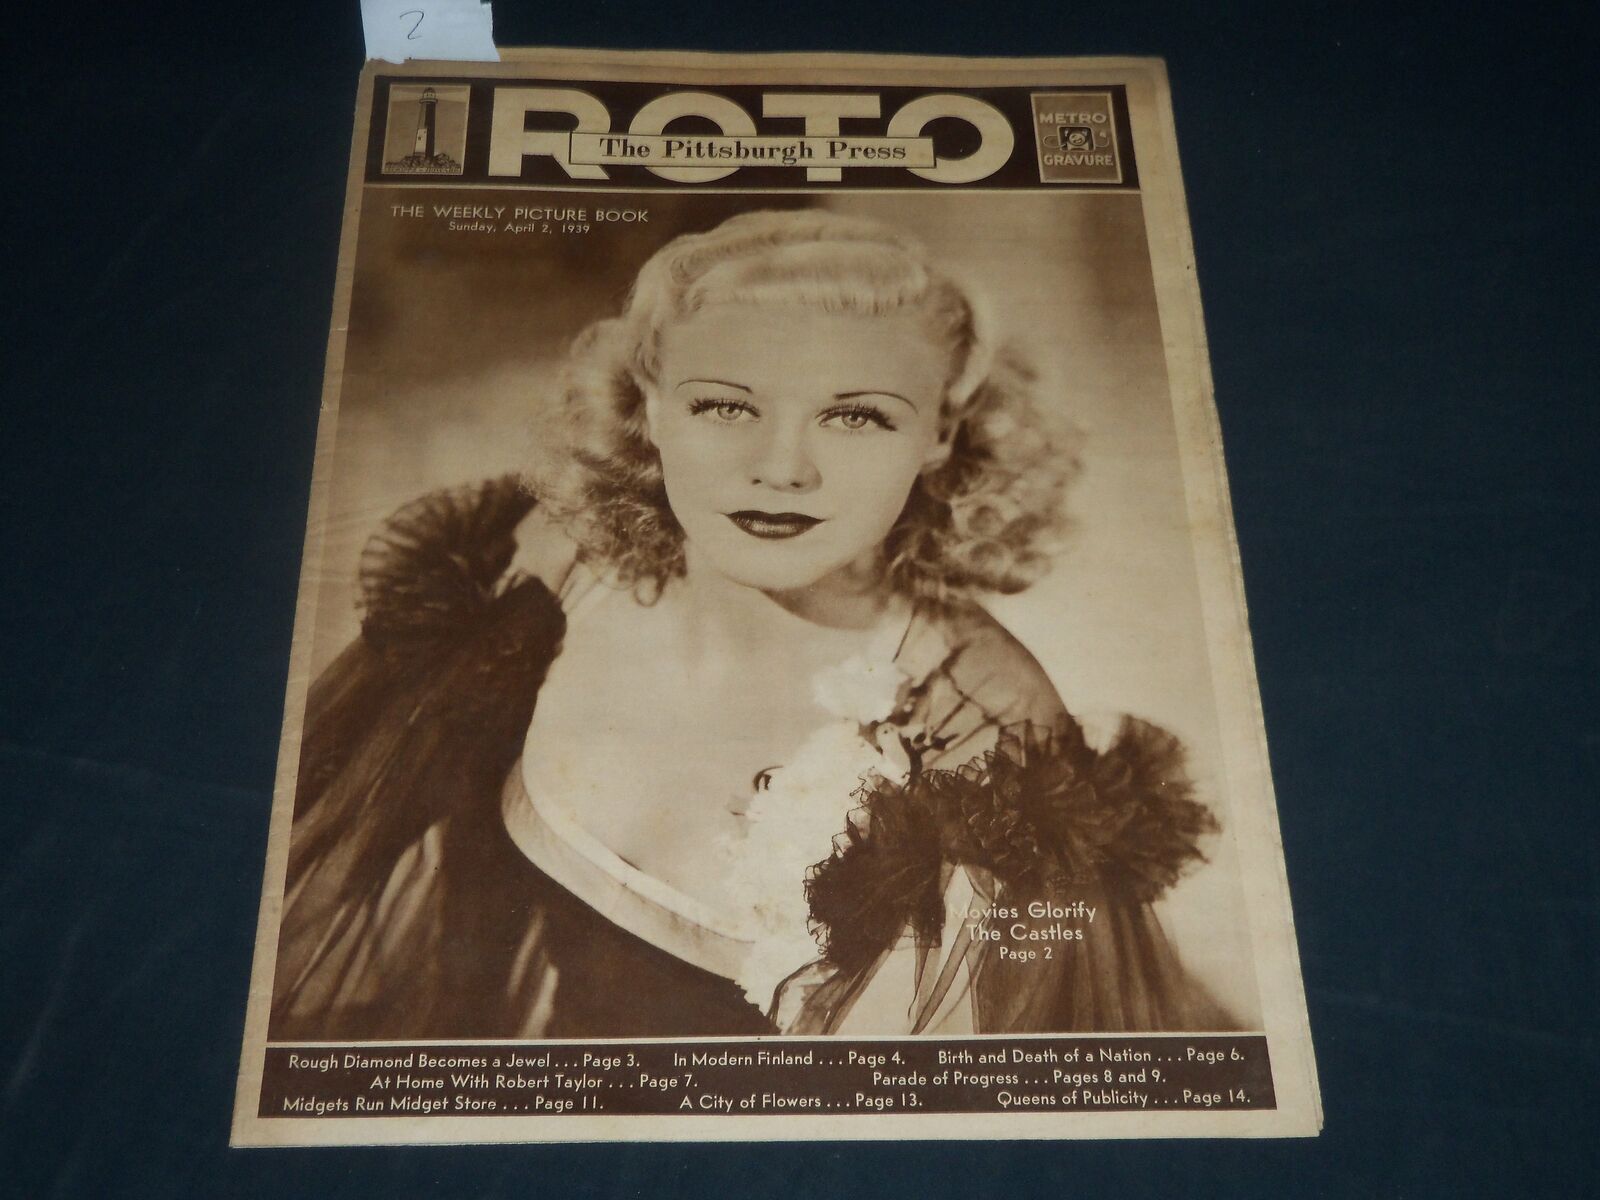 1939 APRIL 2 THE PITTSBURGH PRESS SUNDAY ROTO SECTION - GINGER ROGERS - NP 4596